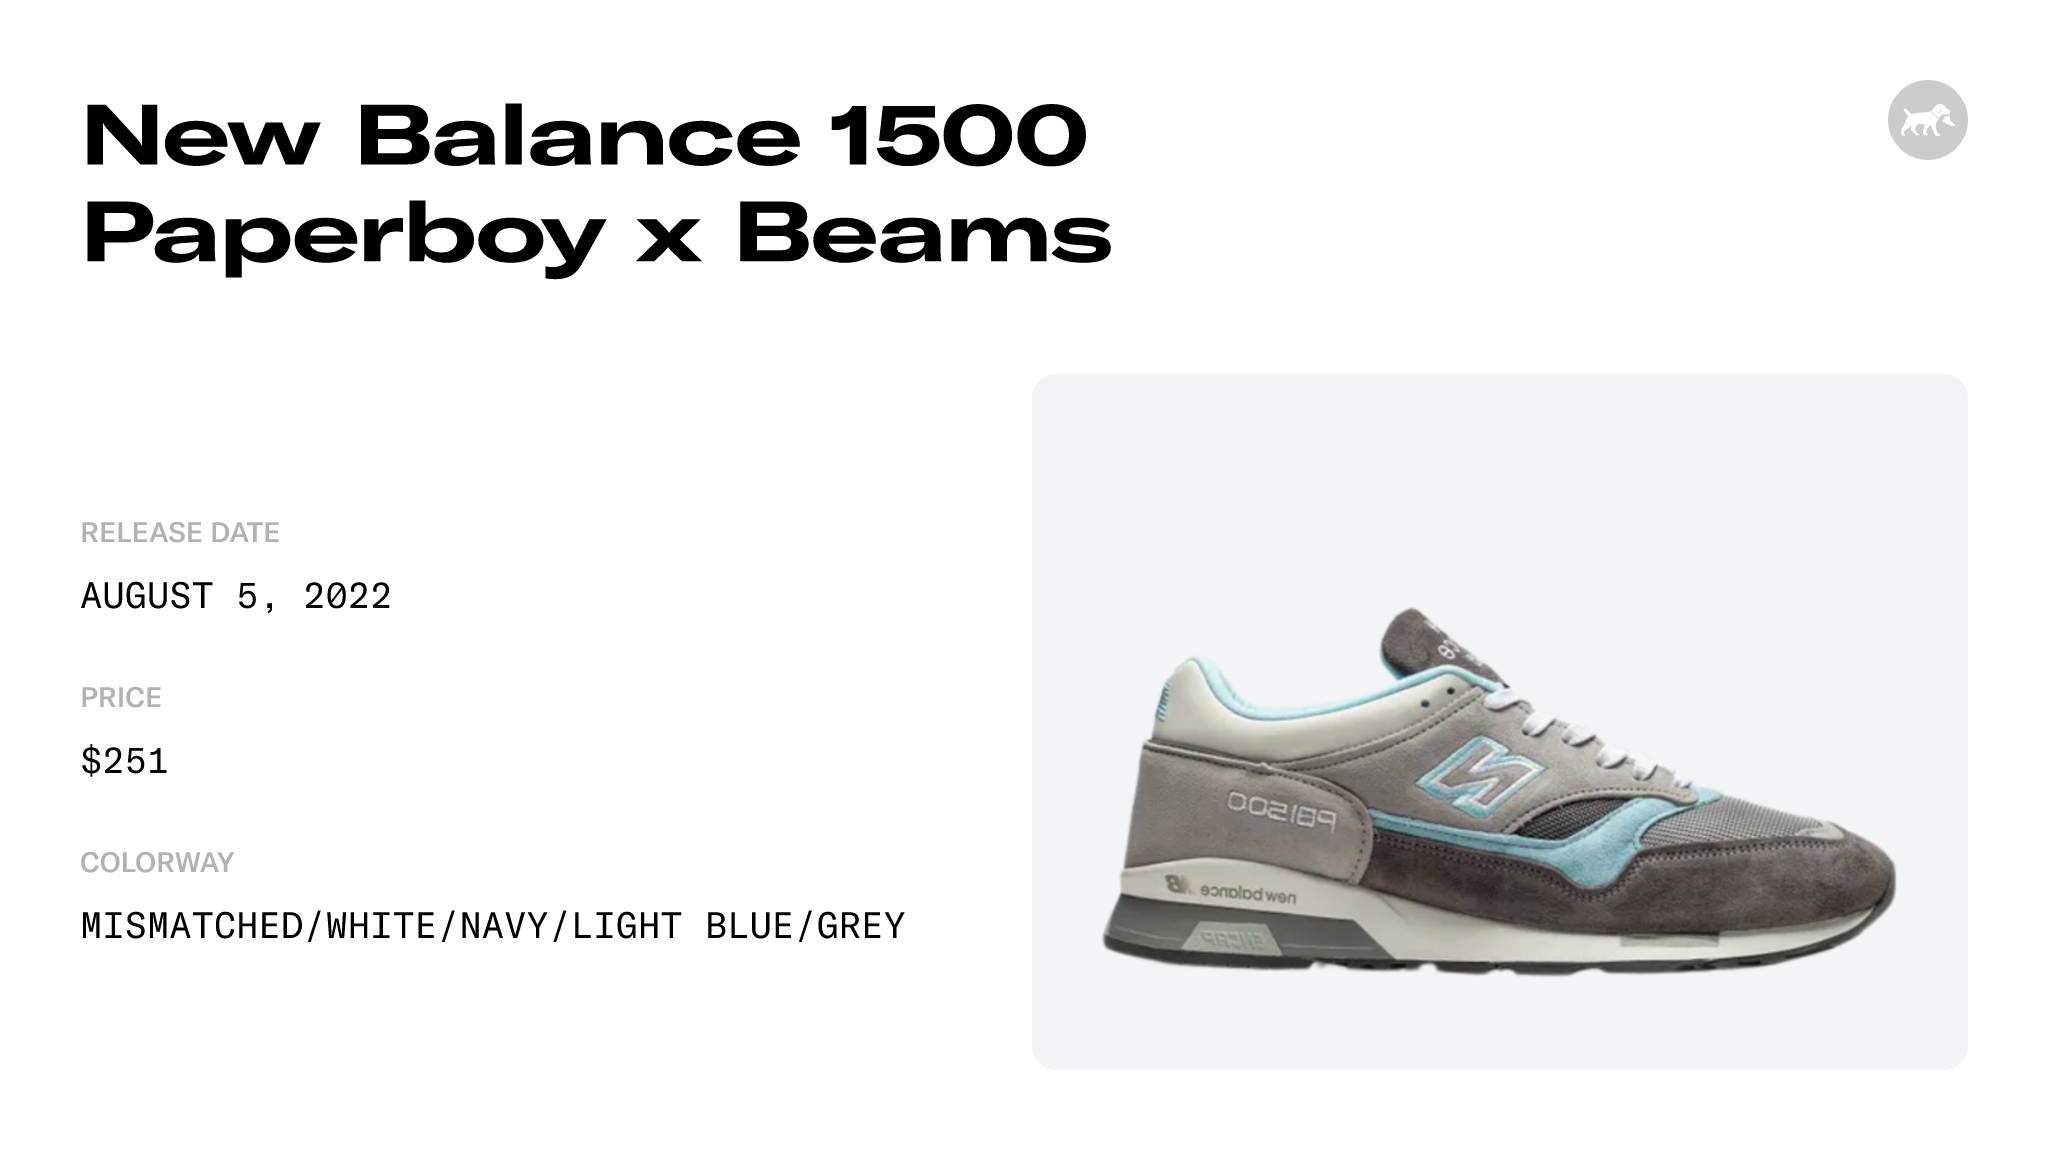 New Balance 1500 Paperboy x Beams - M1500BMS Raffles and Release Date